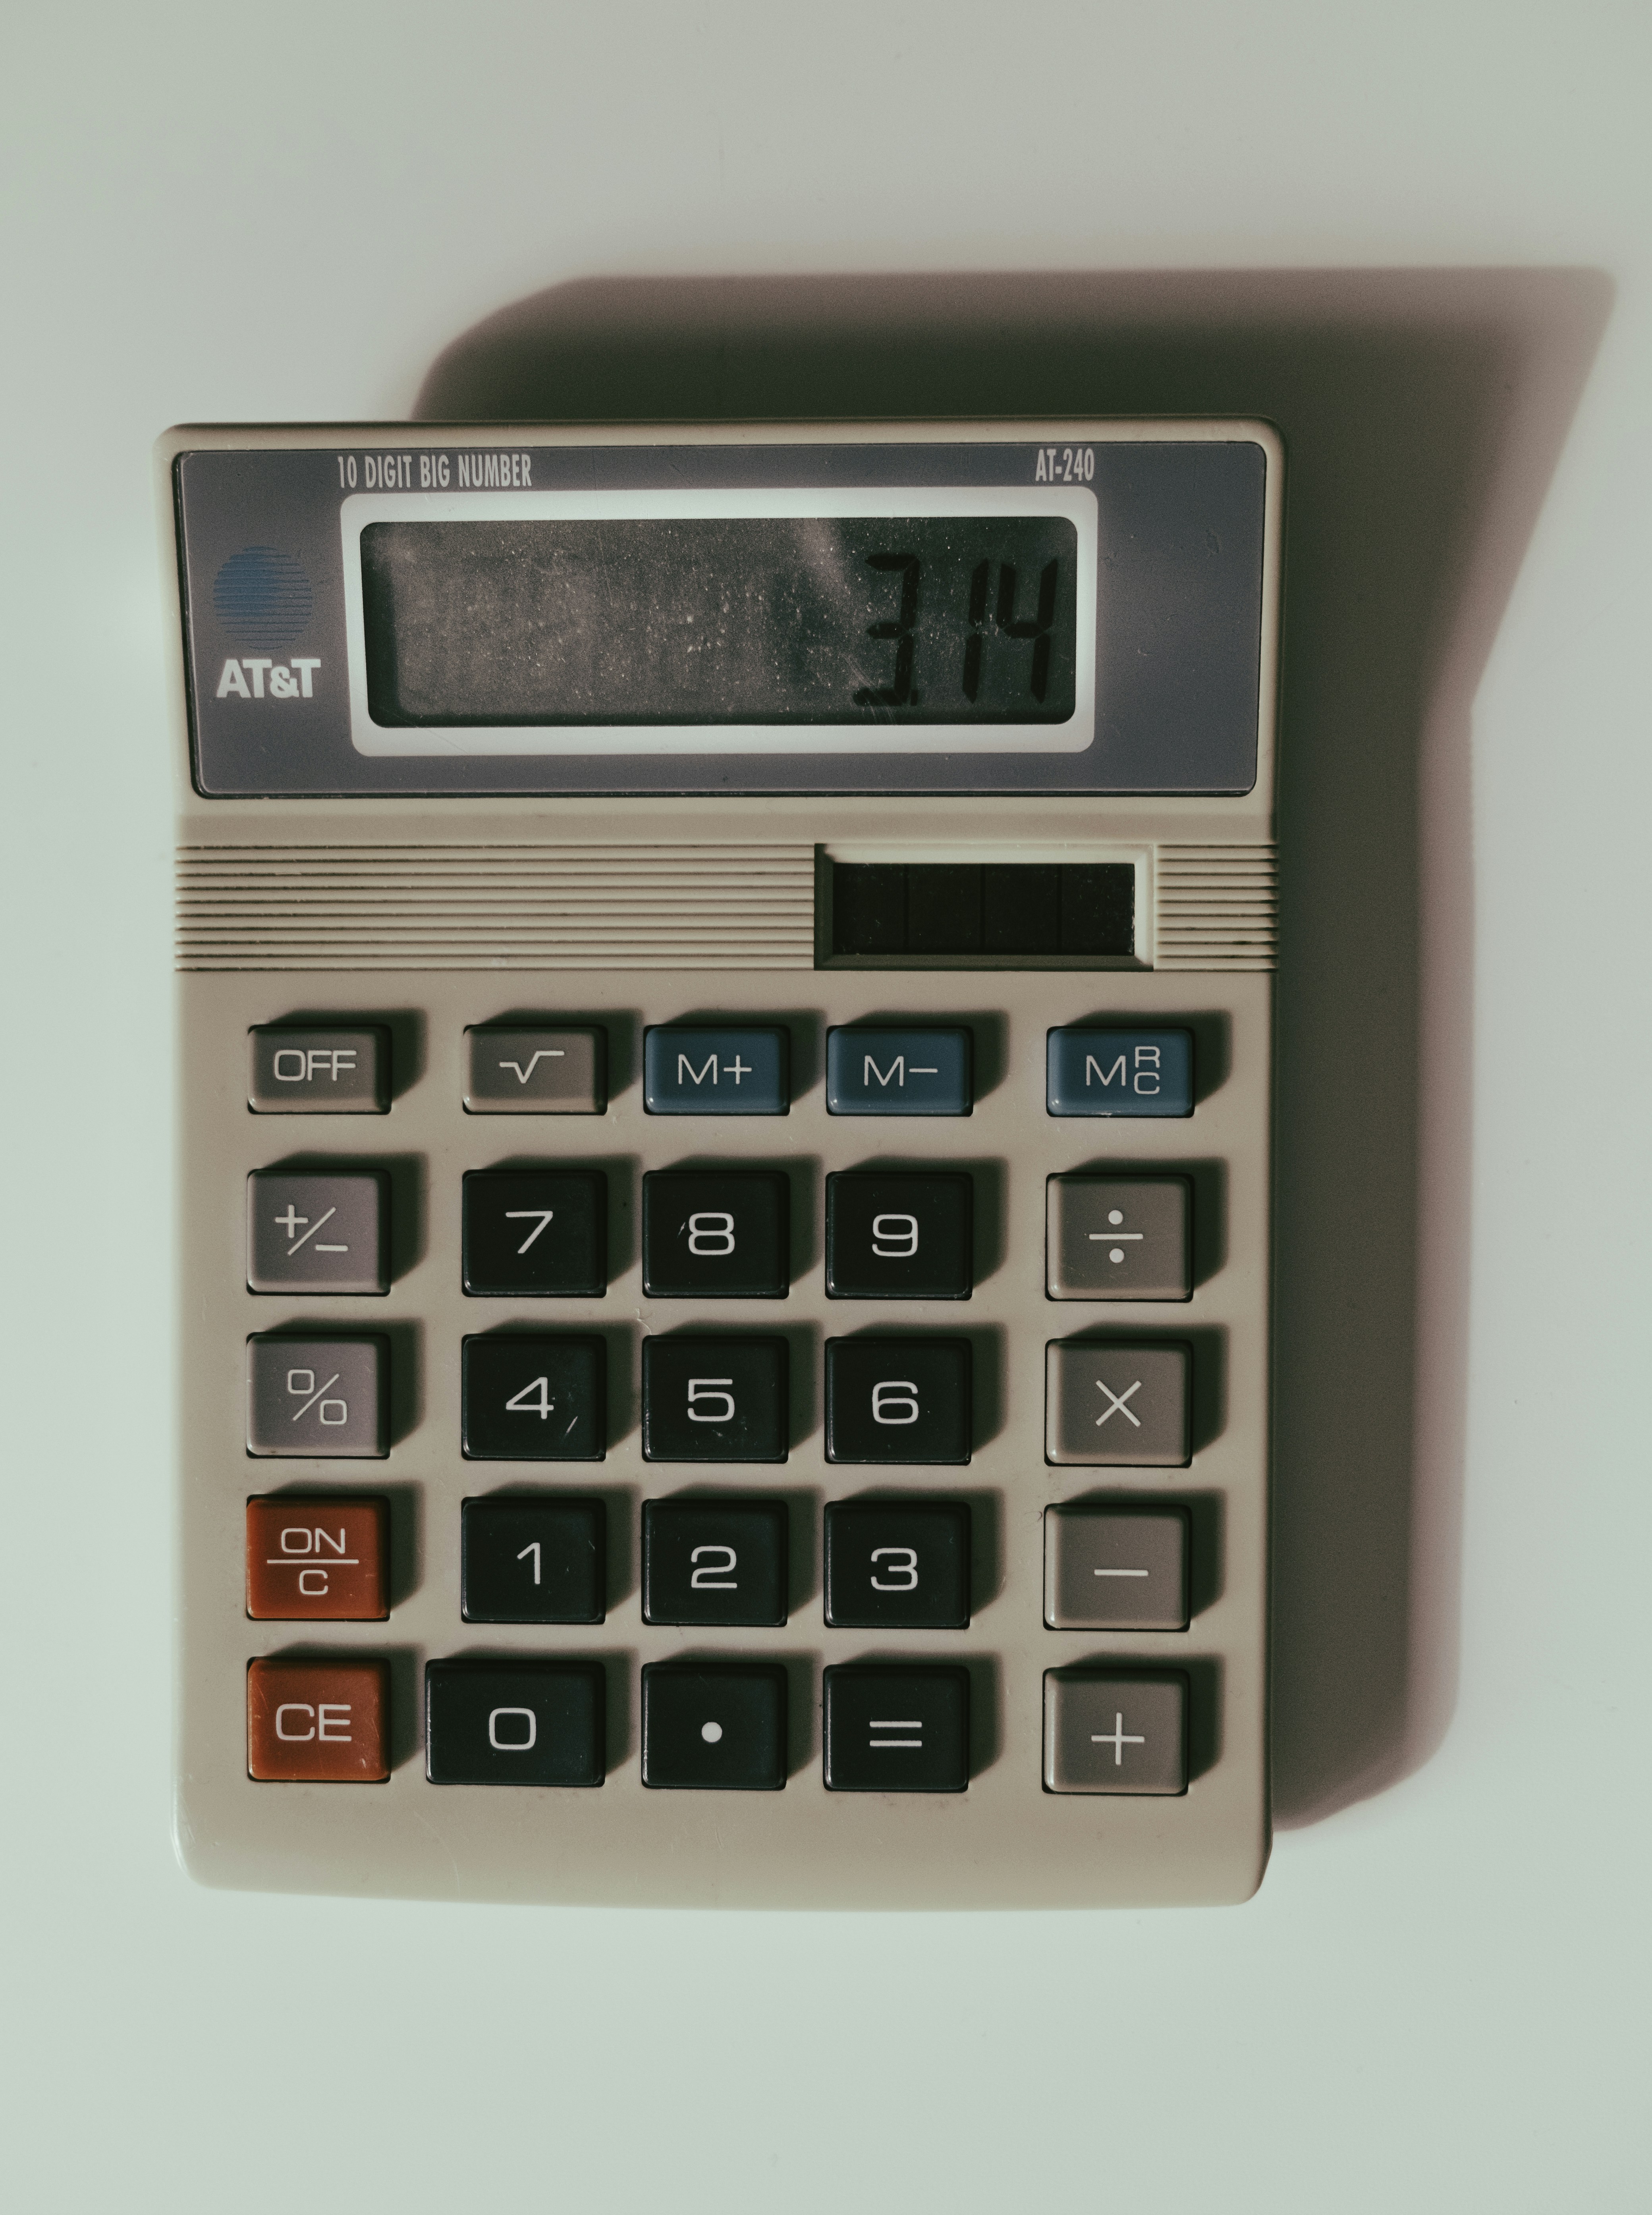 The AT&T 10 digit big number desk calculator - a friend to accountants everywhere (and people who can't remember their times tables)